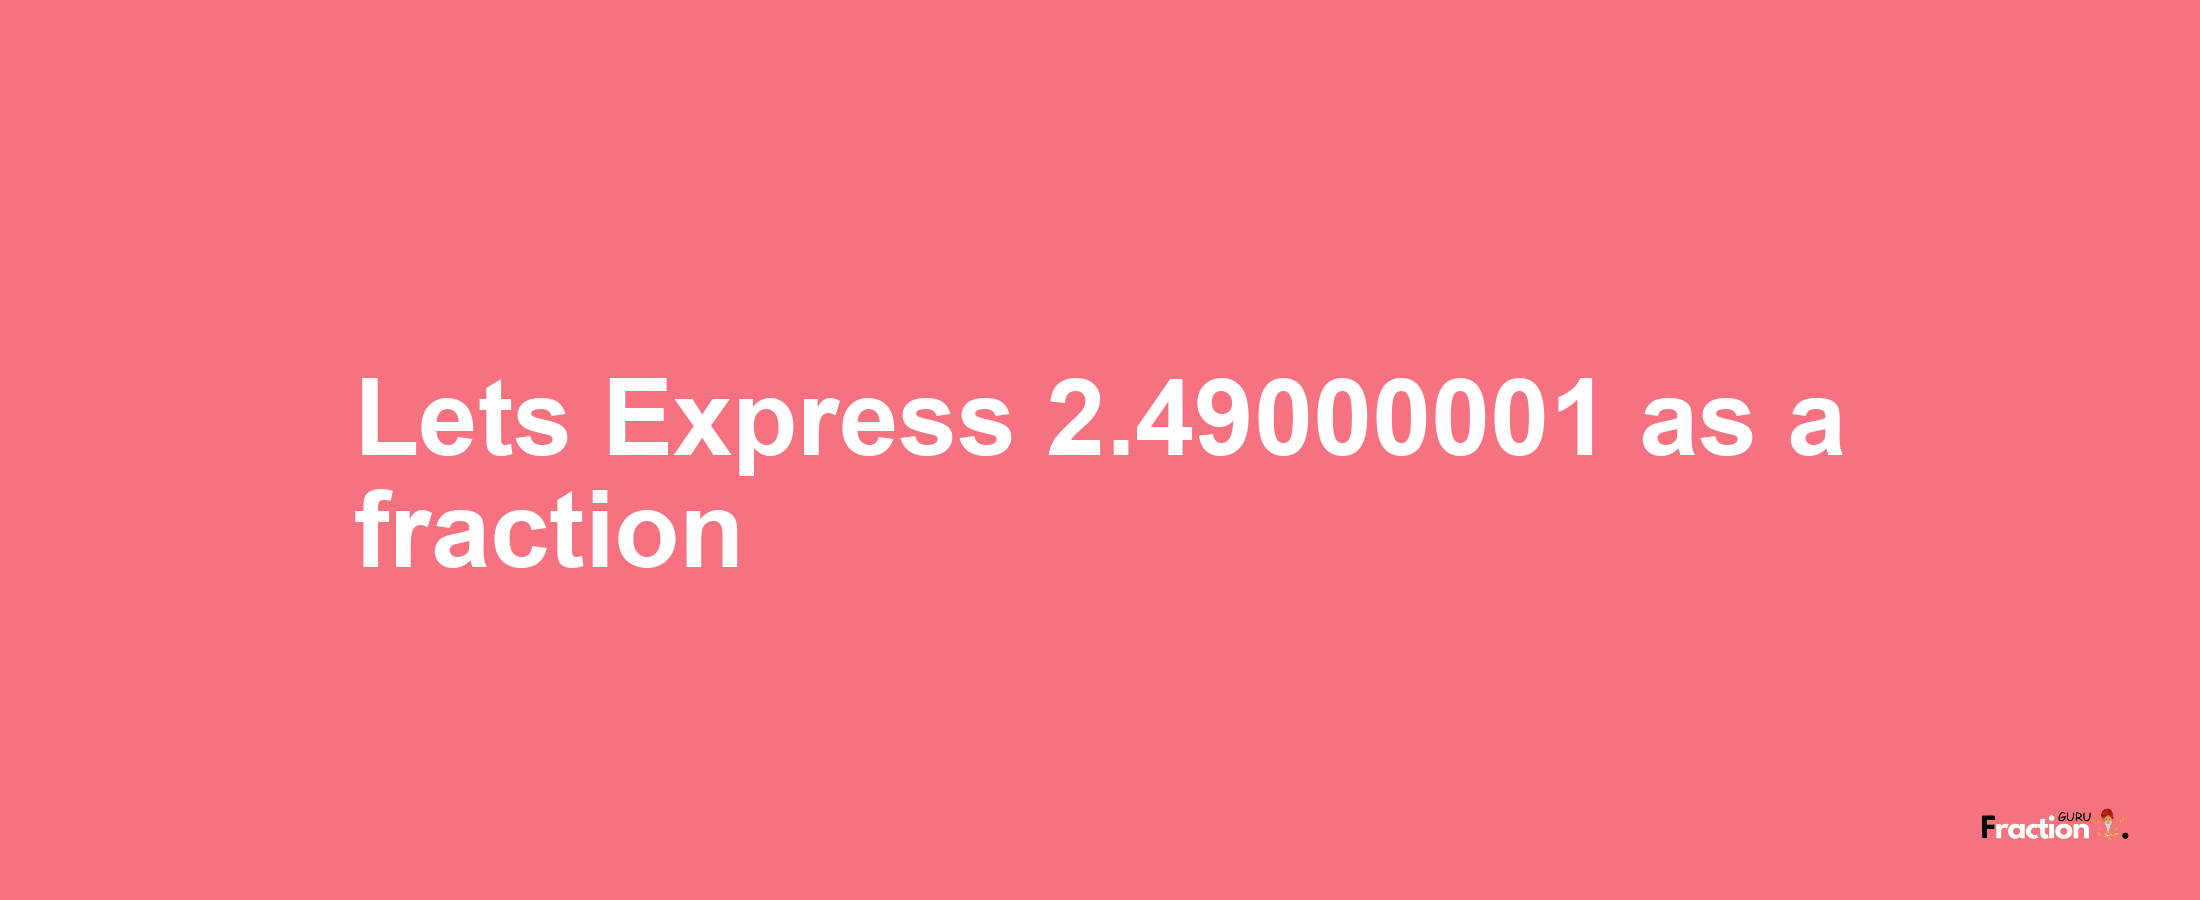 Lets Express 2.49000001 as afraction